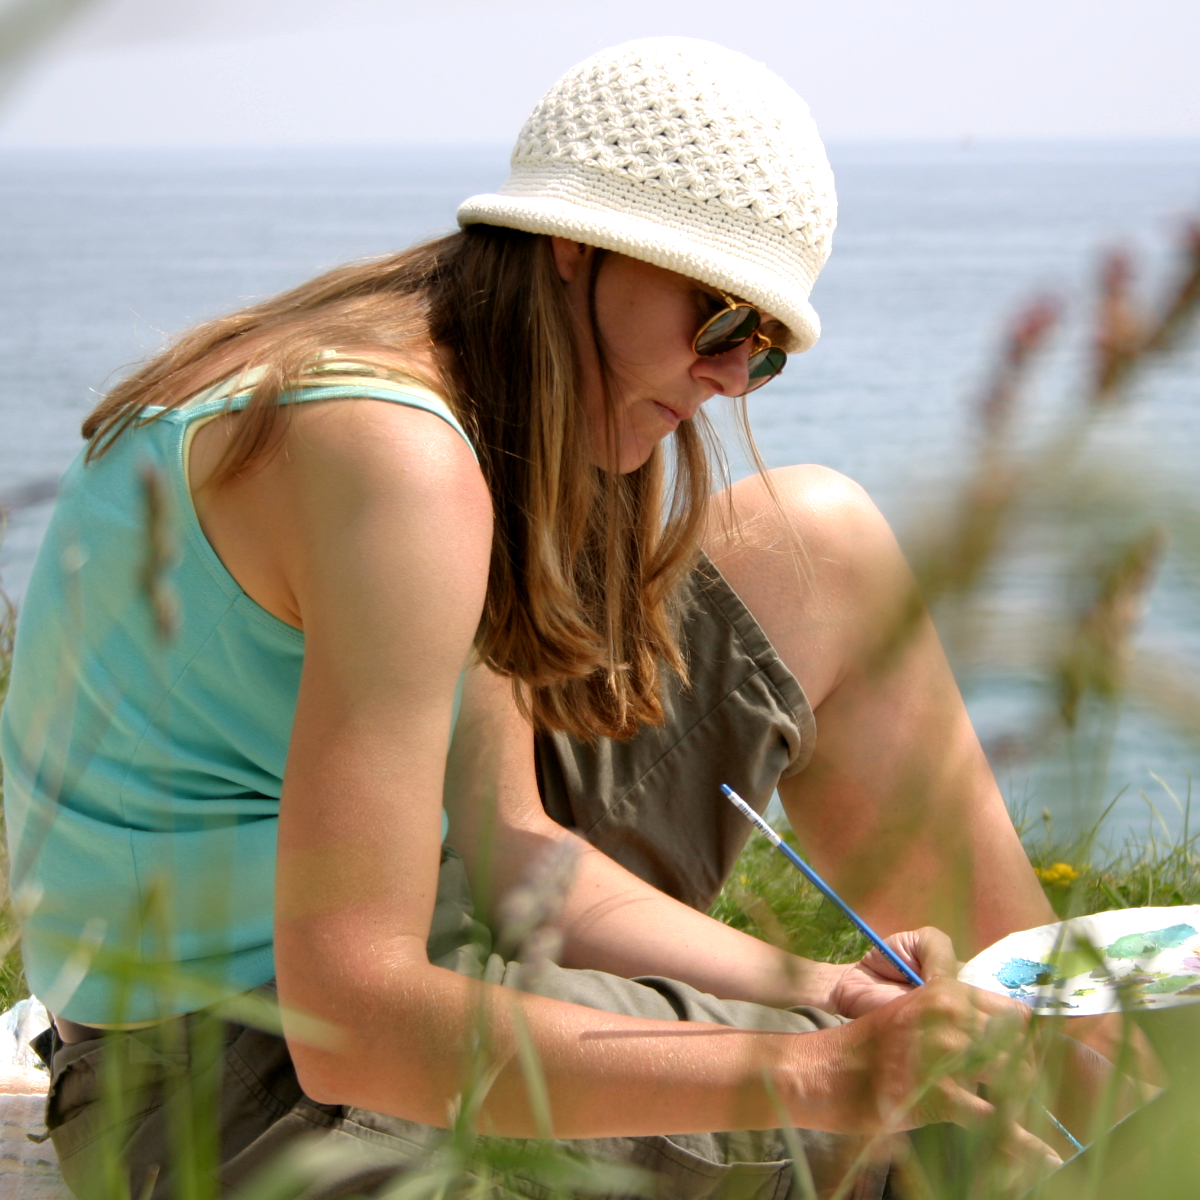 Artist Joanne Short pictured painting on the cliffs of Cornwall